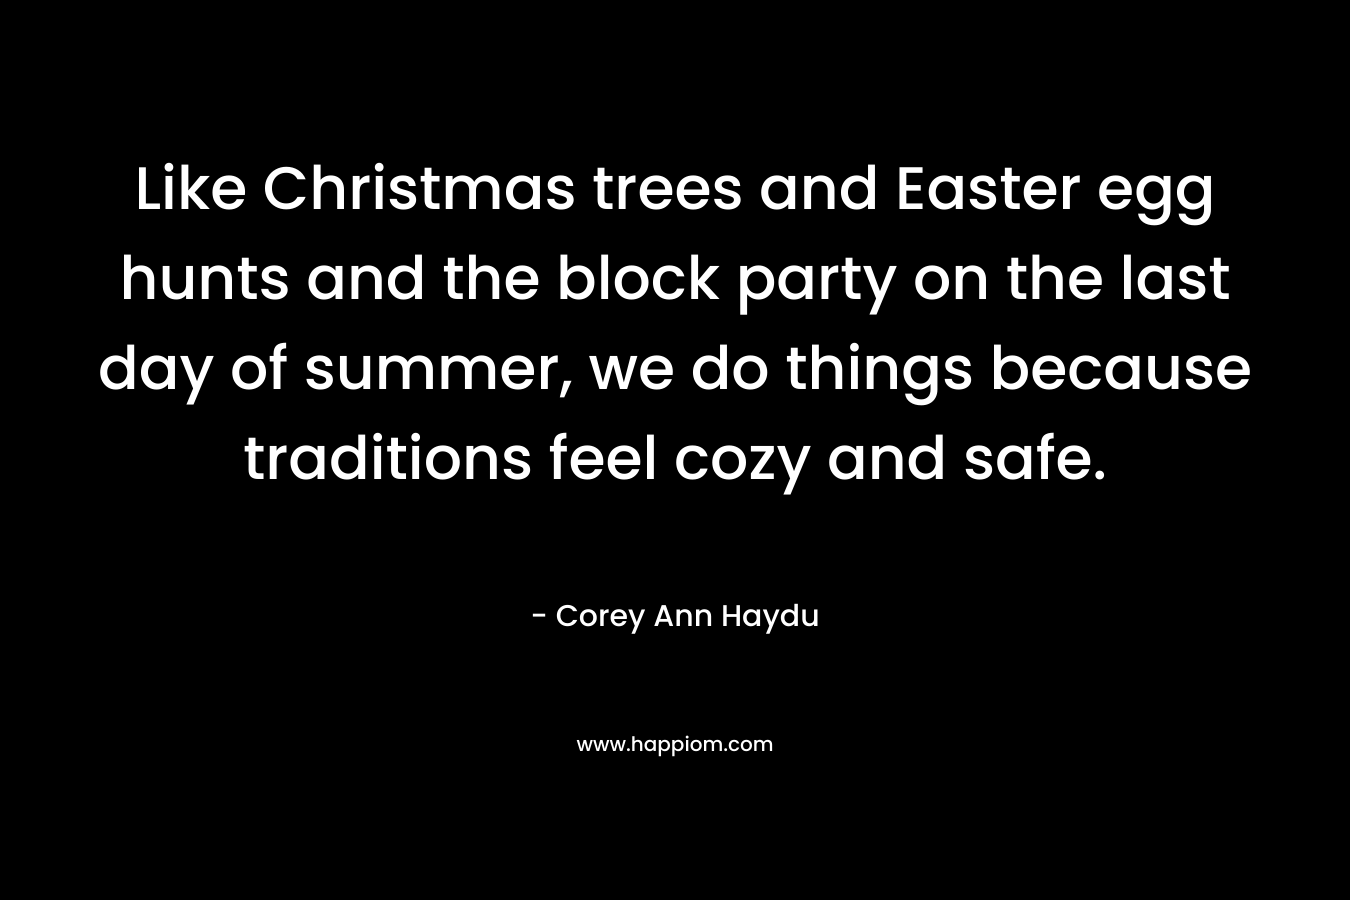 Like Christmas trees and Easter egg hunts and the block party on the last day of summer, we do things because traditions feel cozy and safe. – Corey Ann Haydu